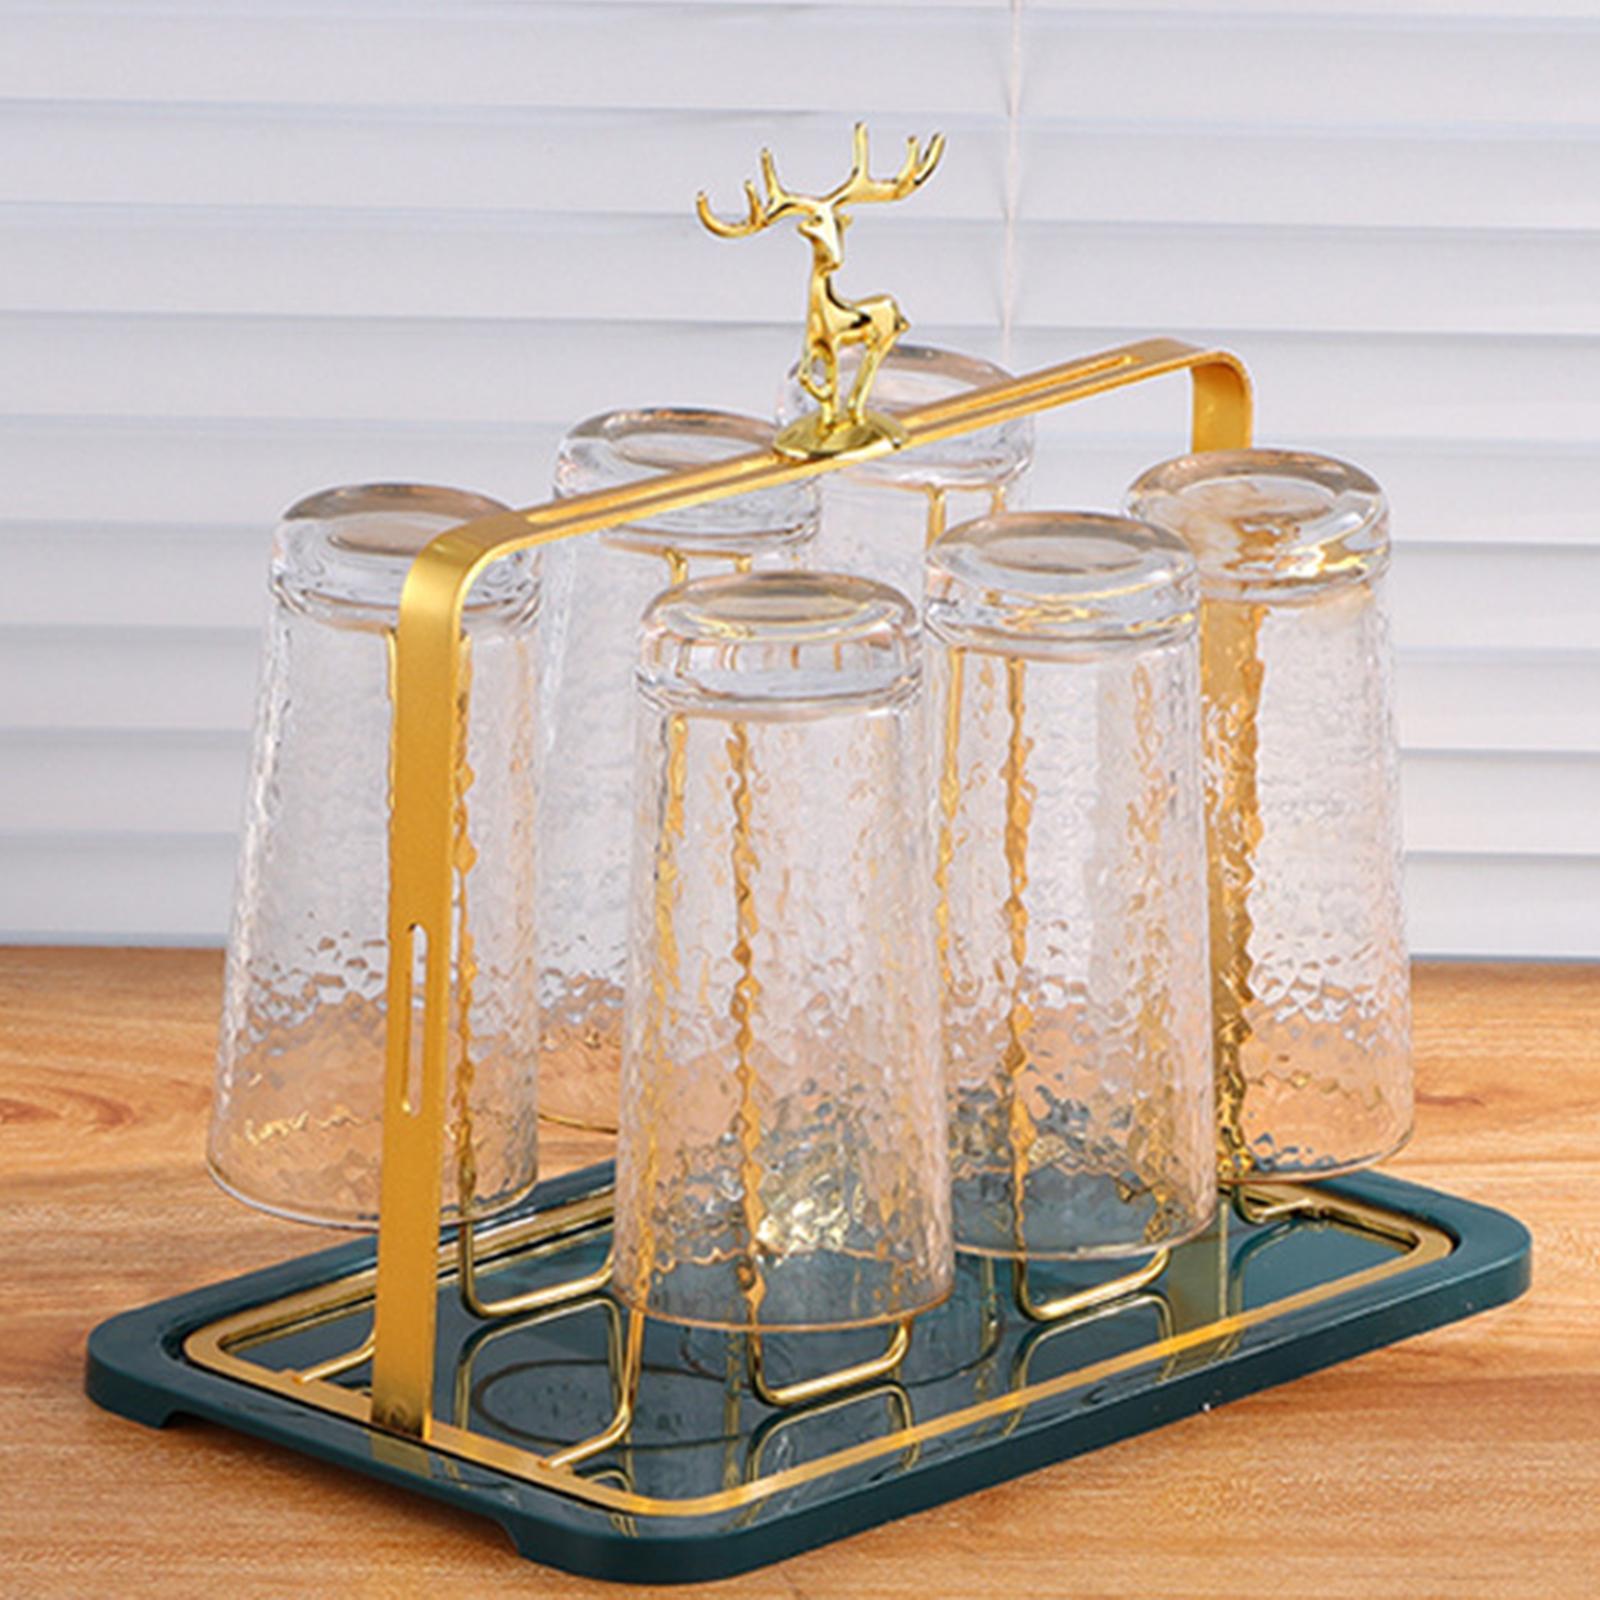 Bottle Drying Rack Stand Sports Bottle Draining Organizer for Coffee Cup Bar